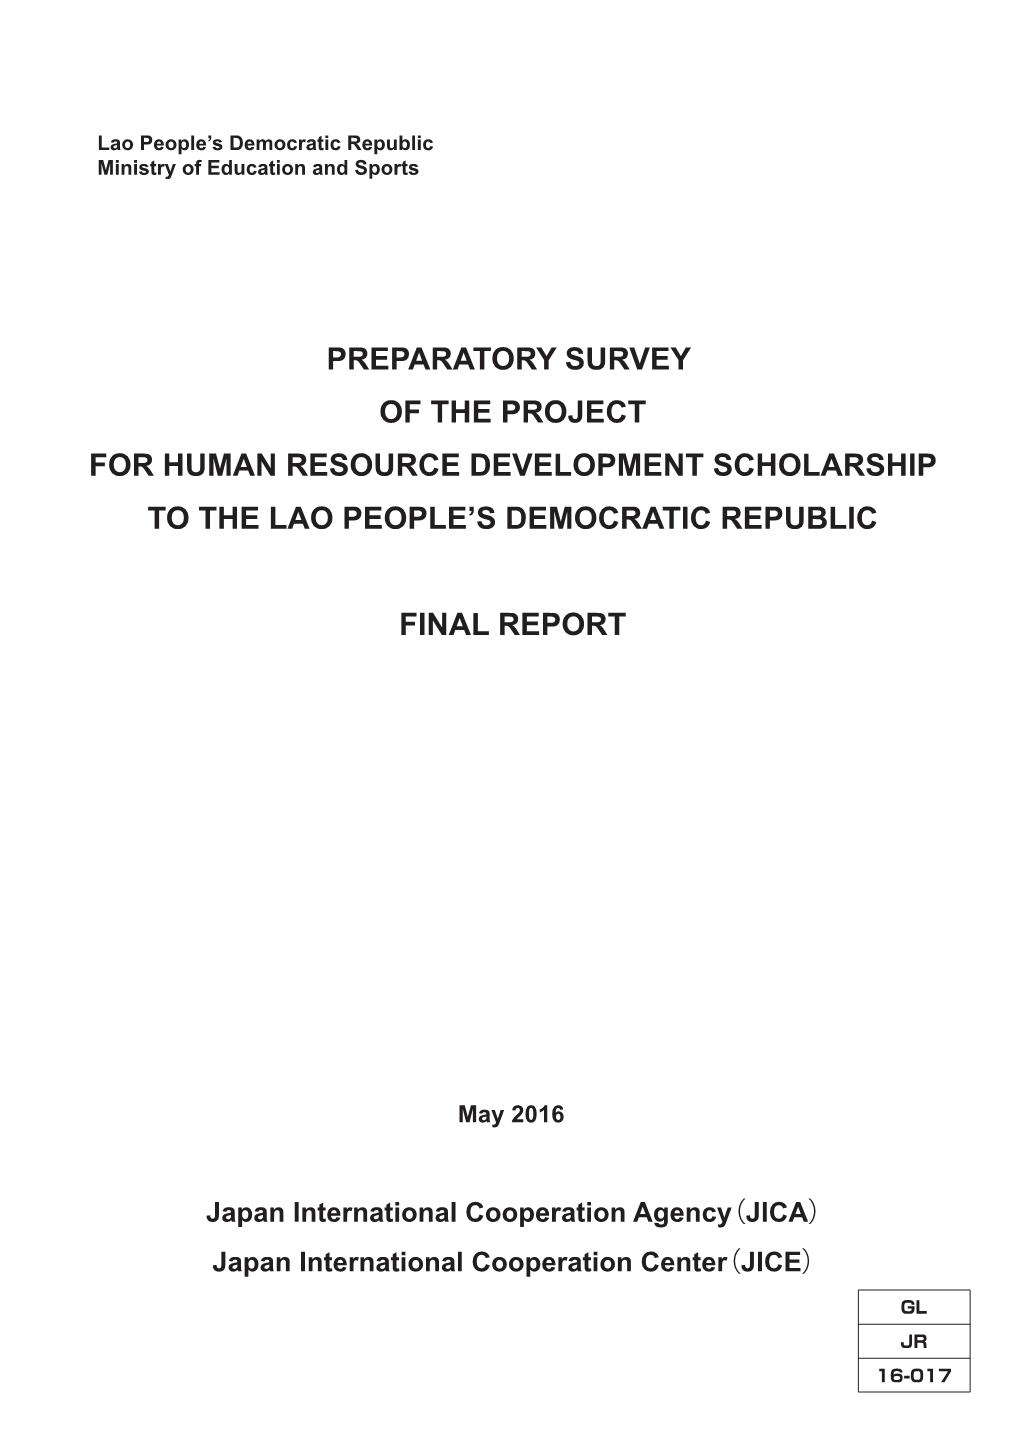 Preparatory Survey of the Project for Human Resource Development Scholarship to the Lao People’S Democratic Republic